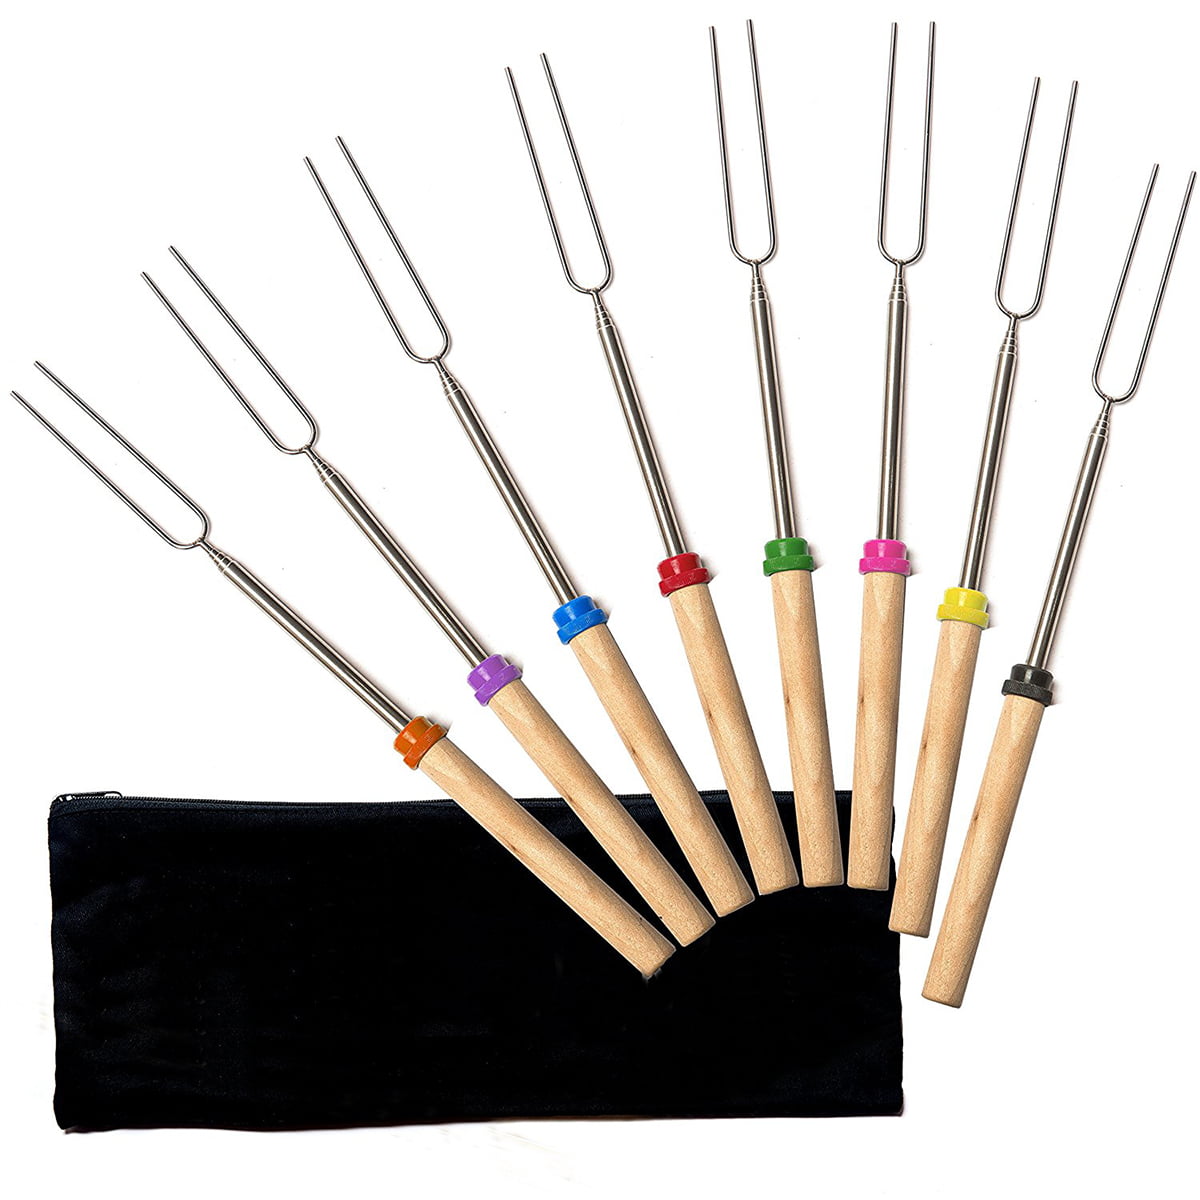 Hot Dog Toasting Forks 32 Inch Campfires Bonfires Special Safe for Kids FREE Storage Bag Triangle Sale Marshmallow Roasting Sticks Set of 6 Telescoping Extendable Smores Skewers For Camping 